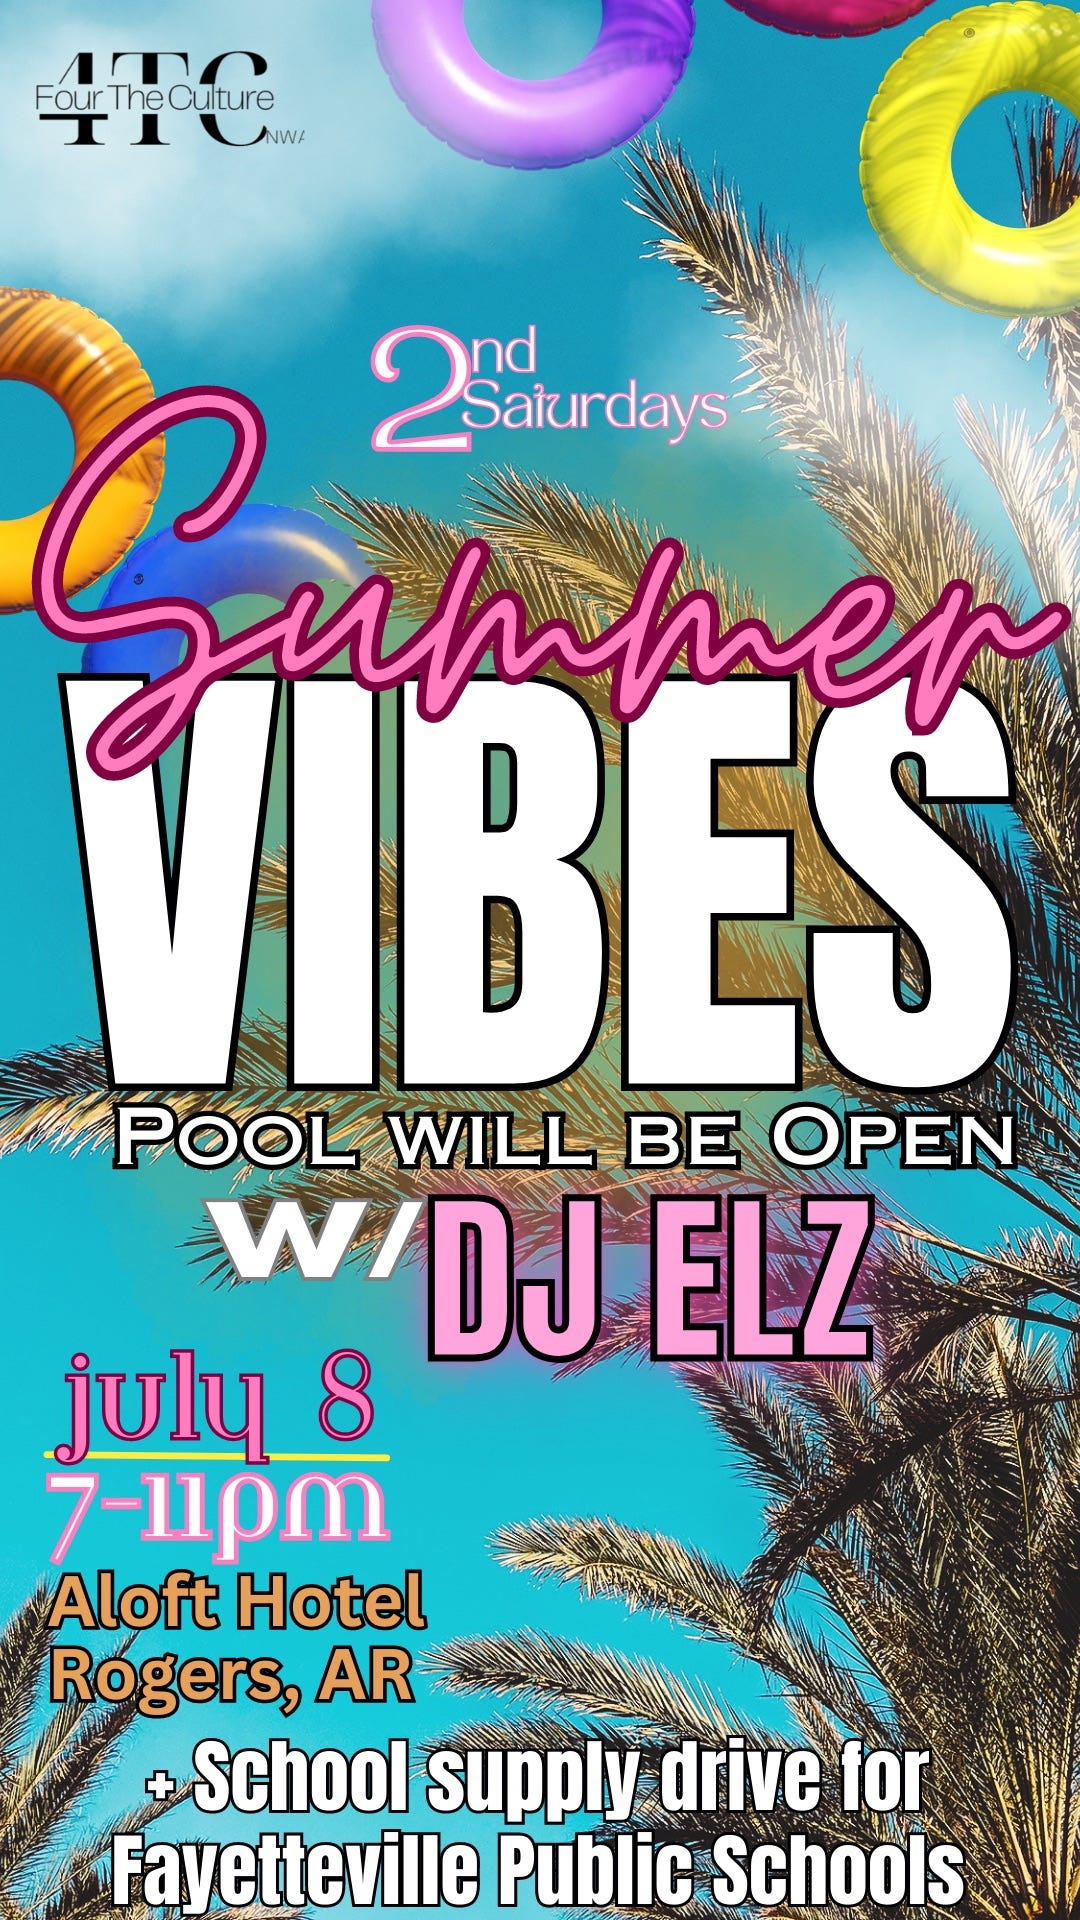 May be an image of text that says 'AO I Four TheCulture T1UN 2Salurdays Jummer VIBES POOL WILL BE OPEN W/DJ ELZ july 8 7-11pm Aloft Hotel Rogers, AR School supply drive for Fayetteville Public Schools'